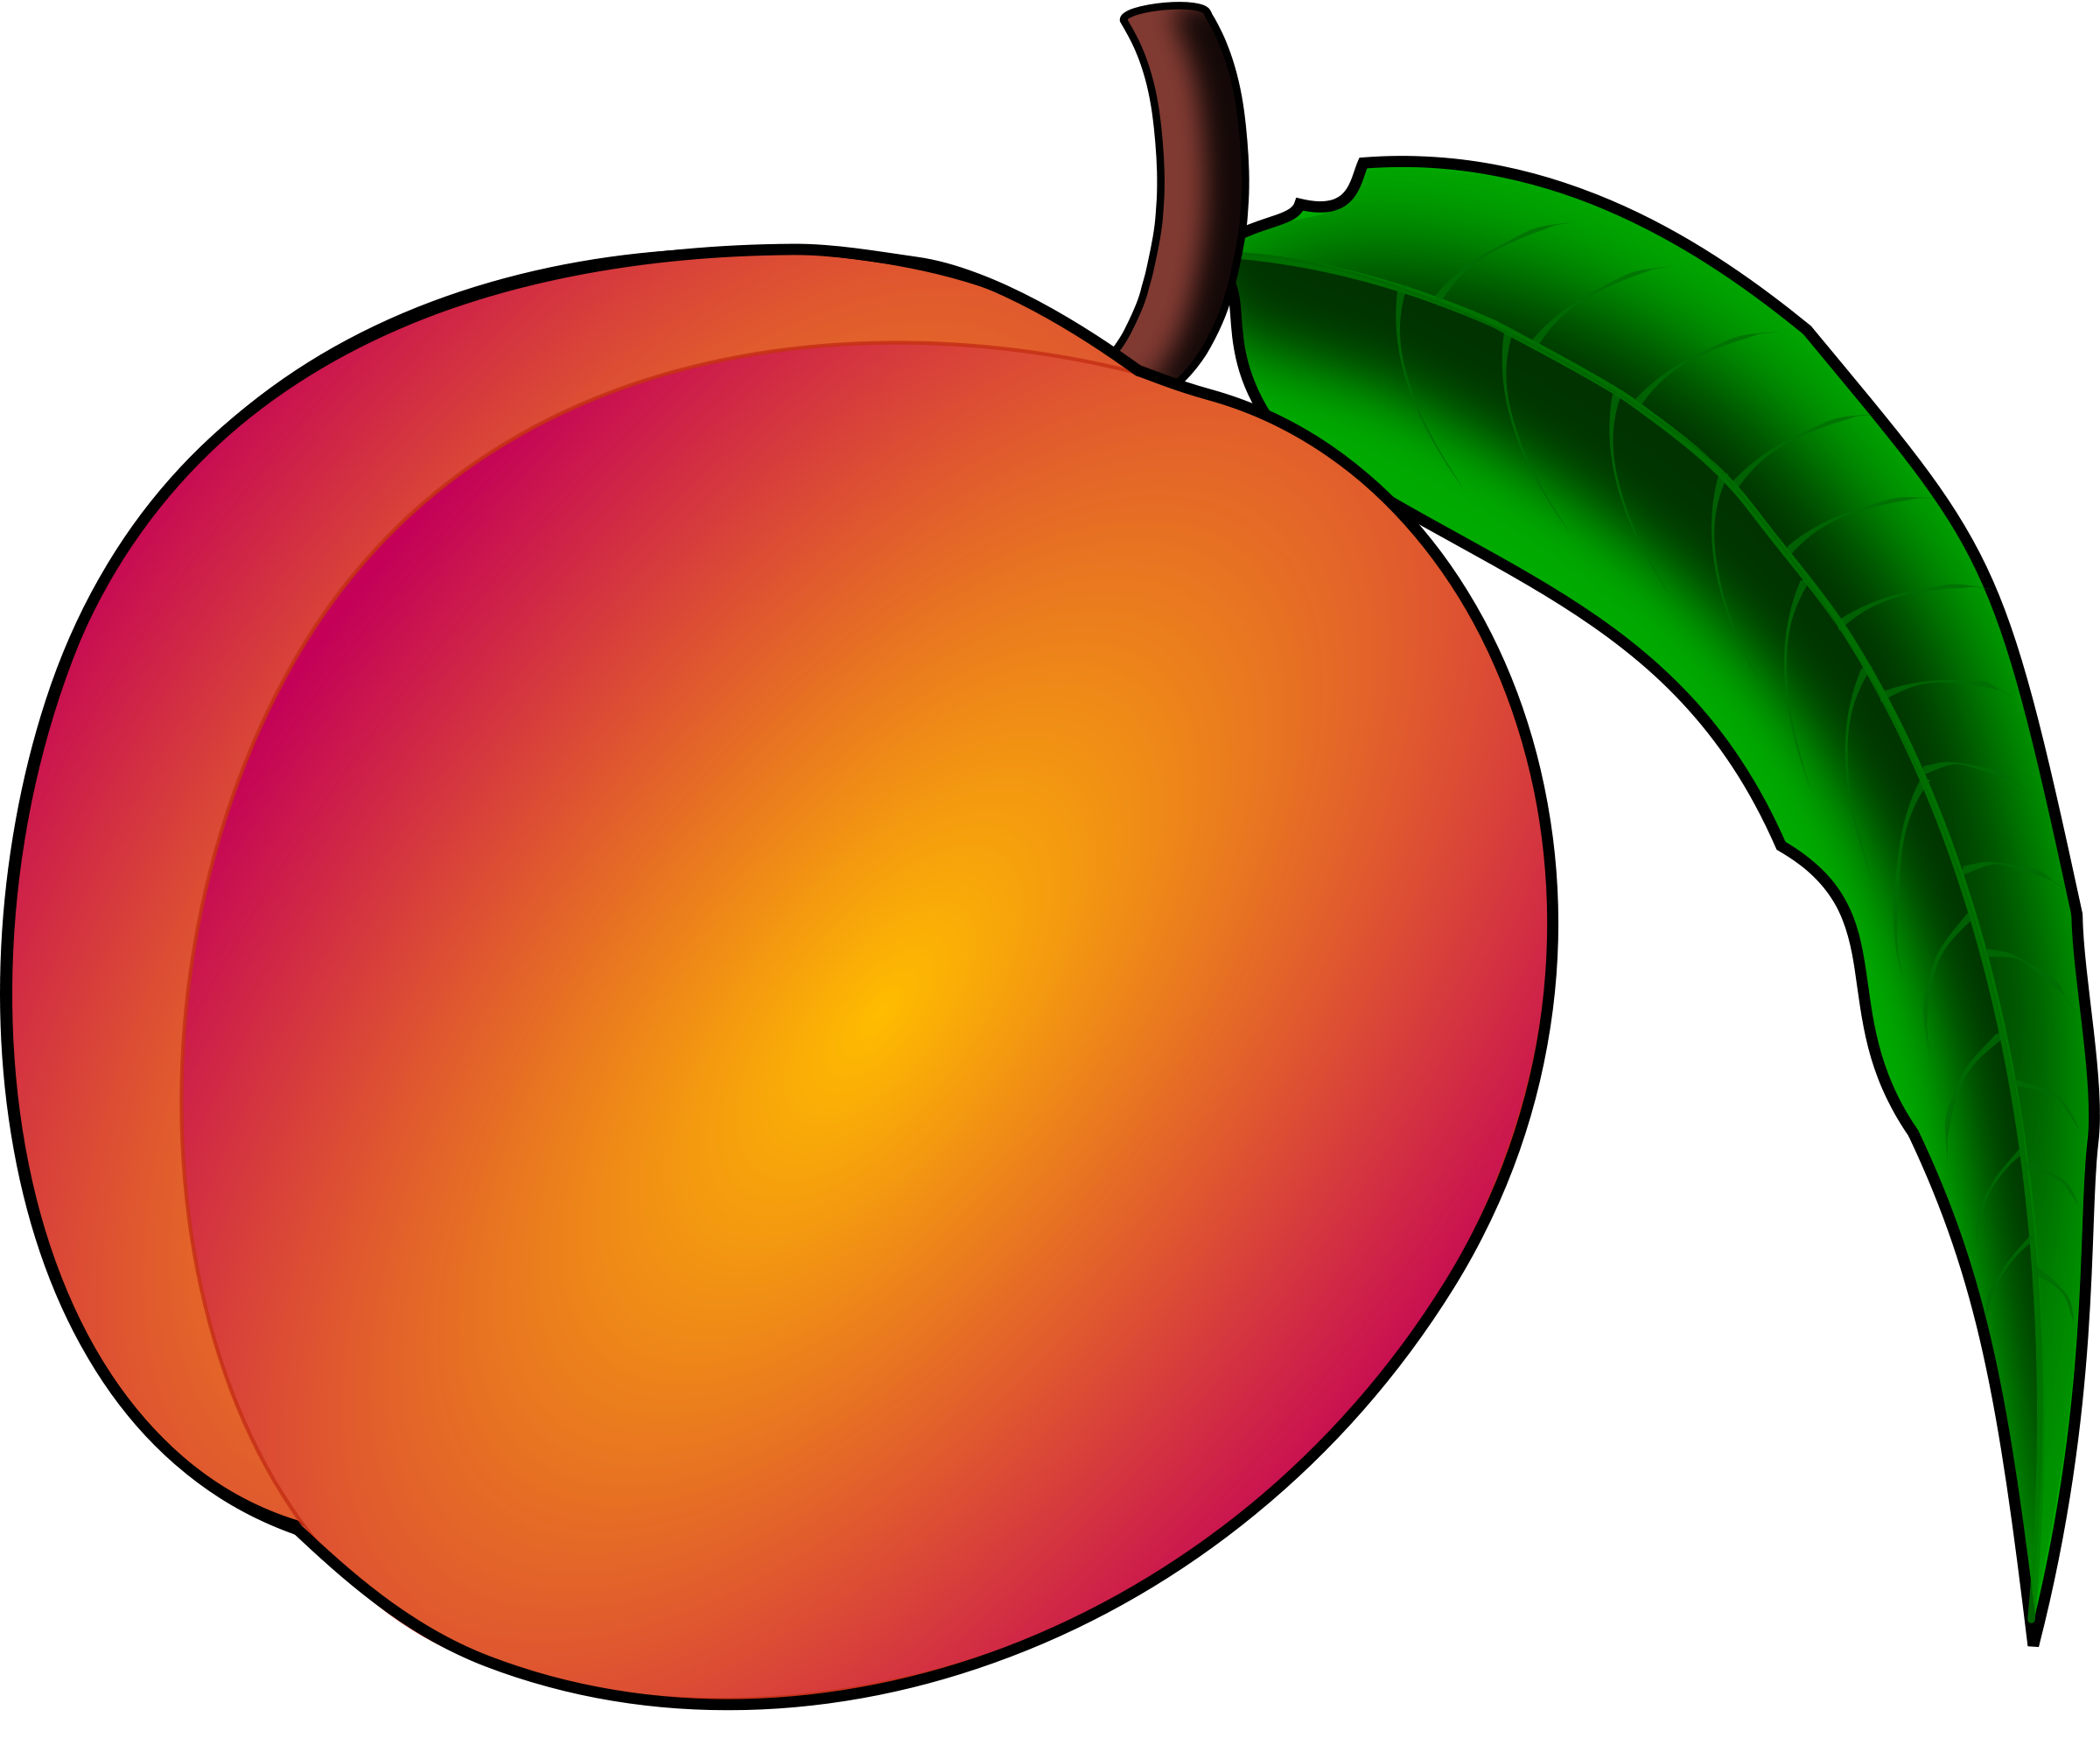 Peach clipart #13, Download drawings